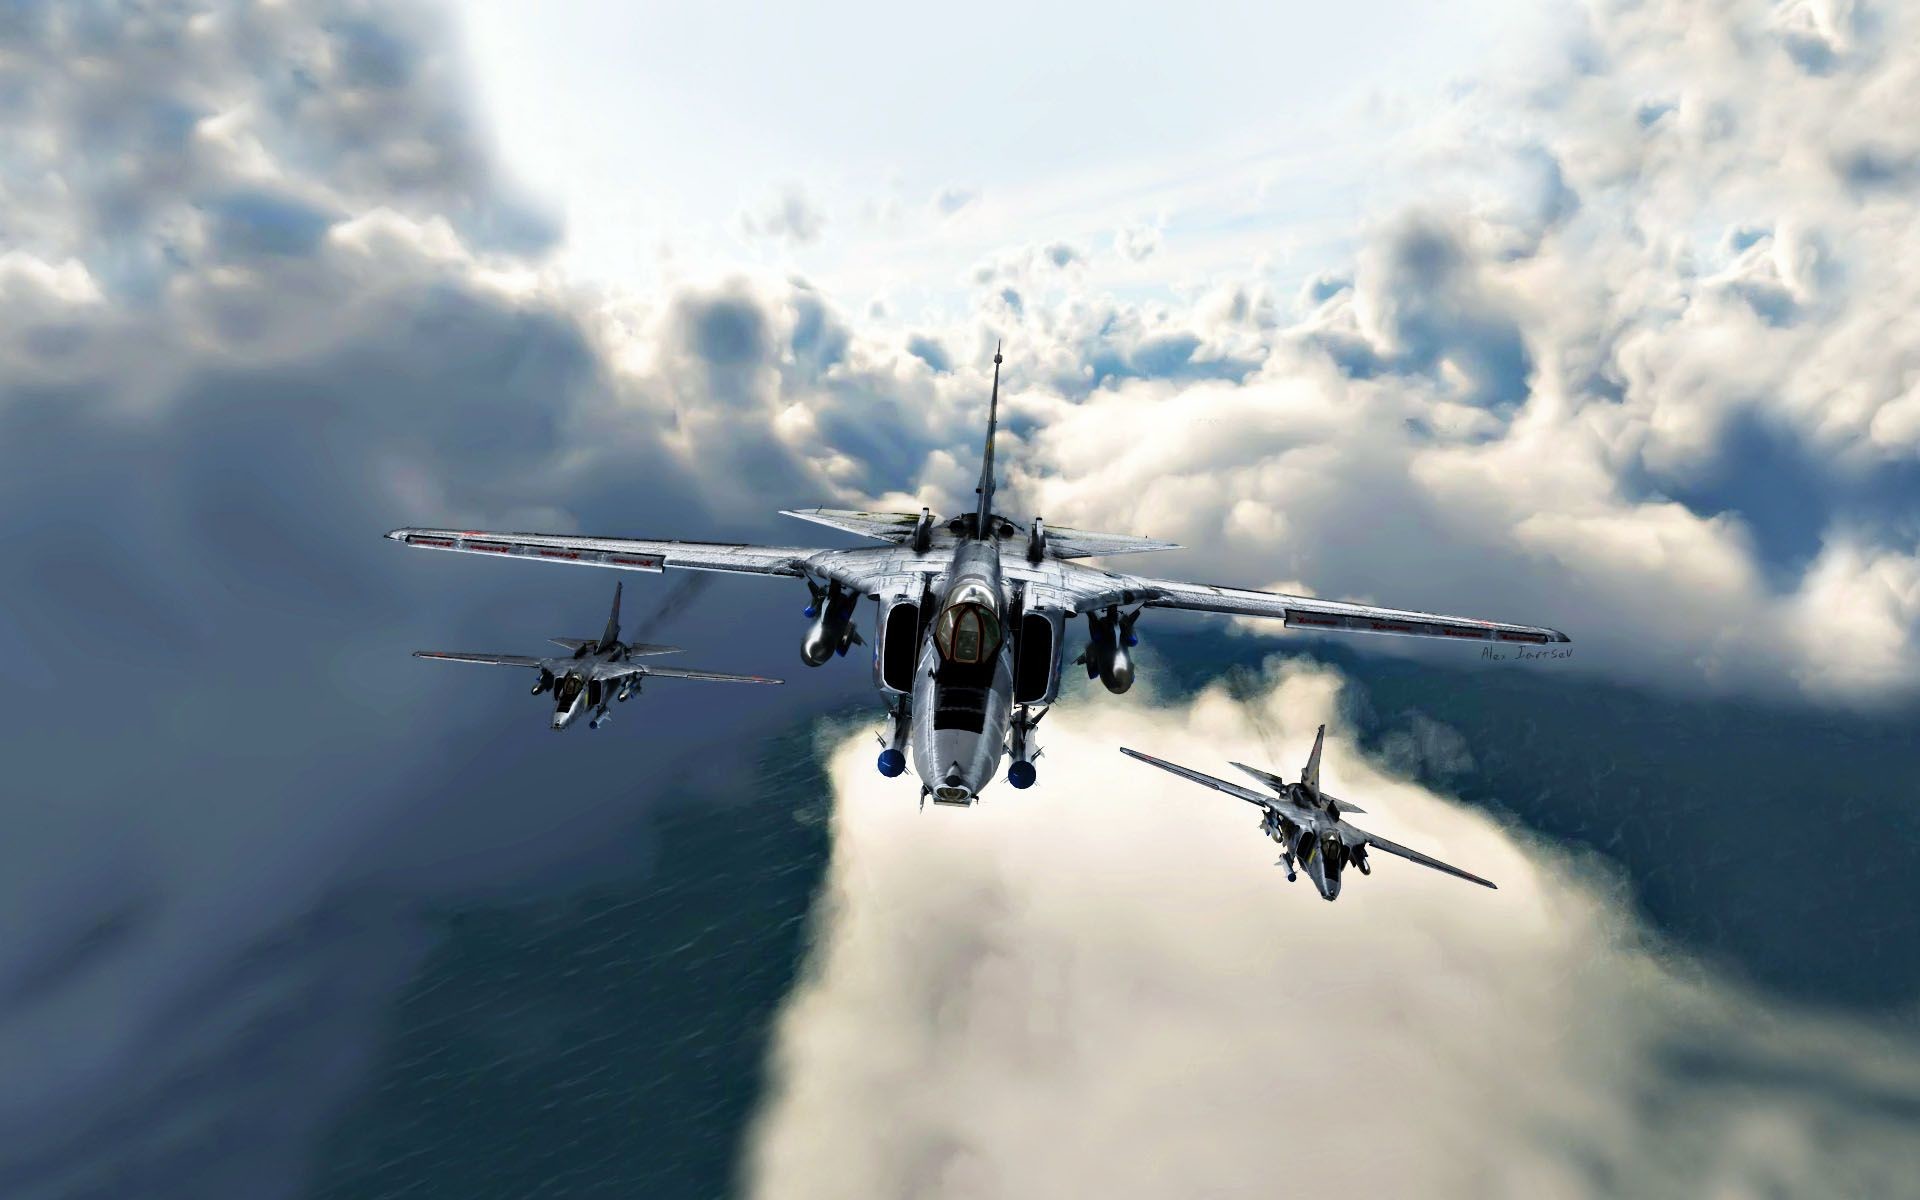 Fighter Plane Aircraft in Air HD Wallpapers  HD Wallpapers